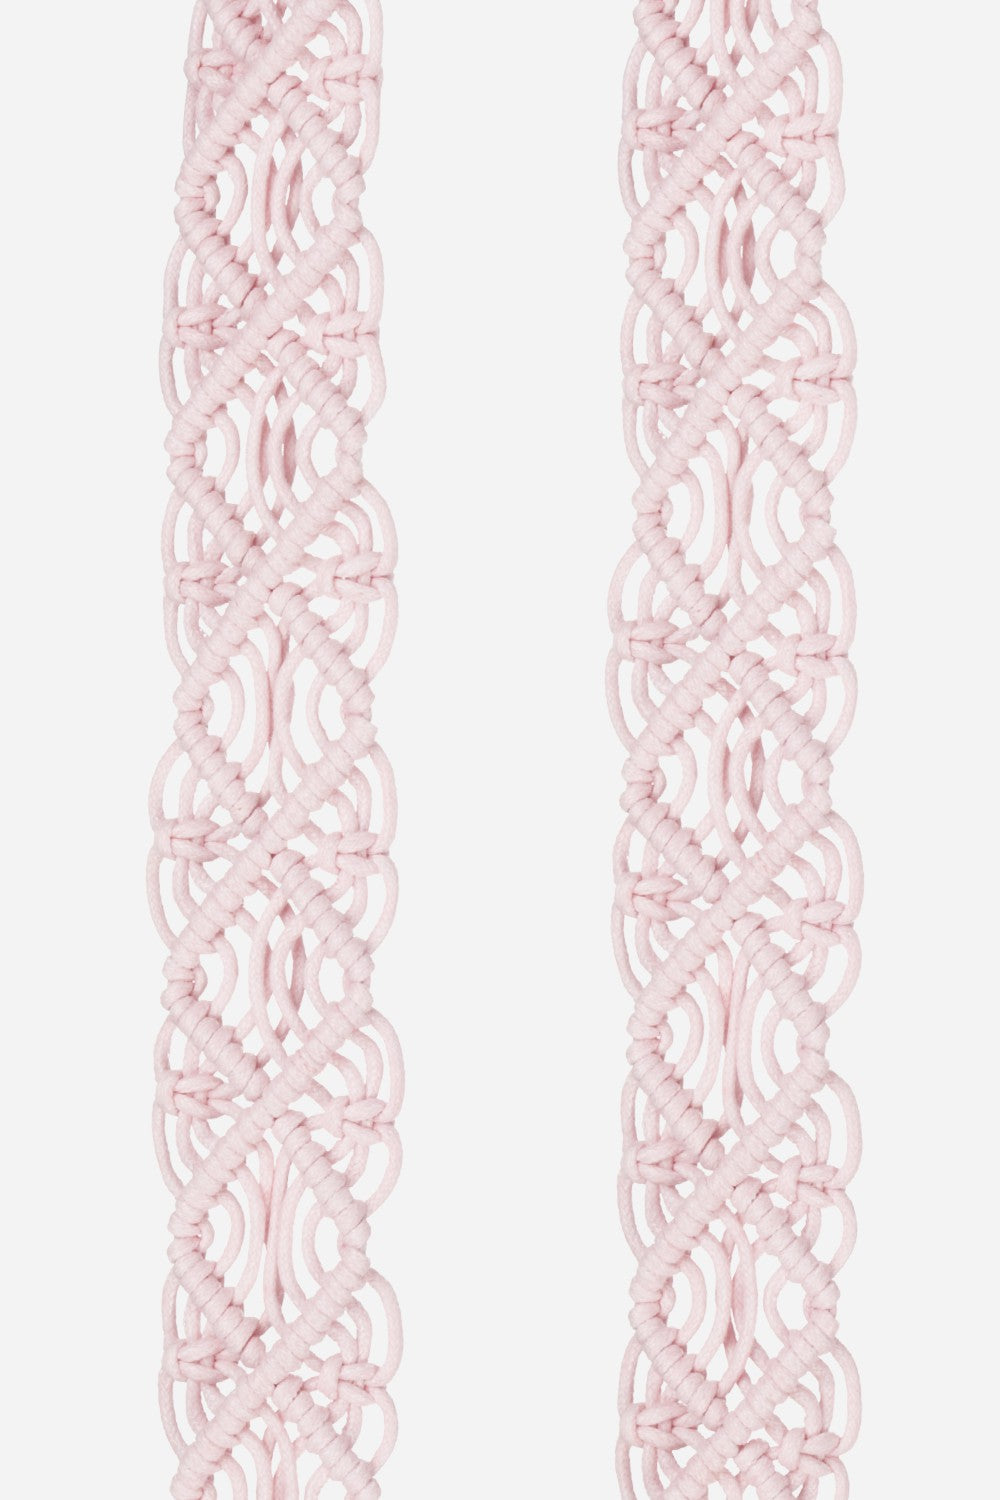 Long Eve Chain Pink 120 cm